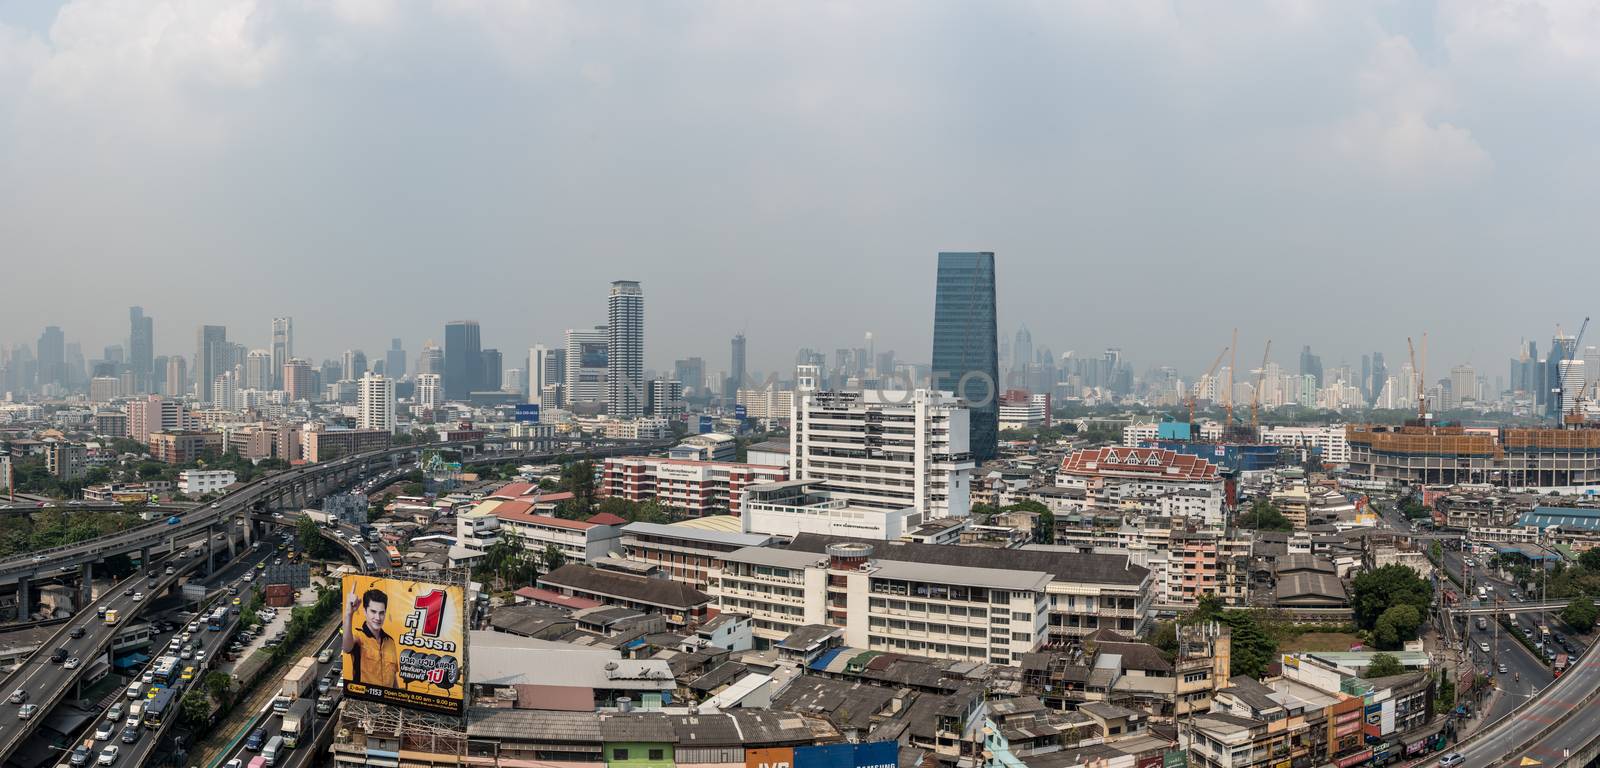 Bangkok, Thailand - January 31, 2019 : Cityscape of Bangkok city with smog PM2.5 dust exceed the standard value of Bangkok city with bad weather air pollution cause poor visibility and health hazards